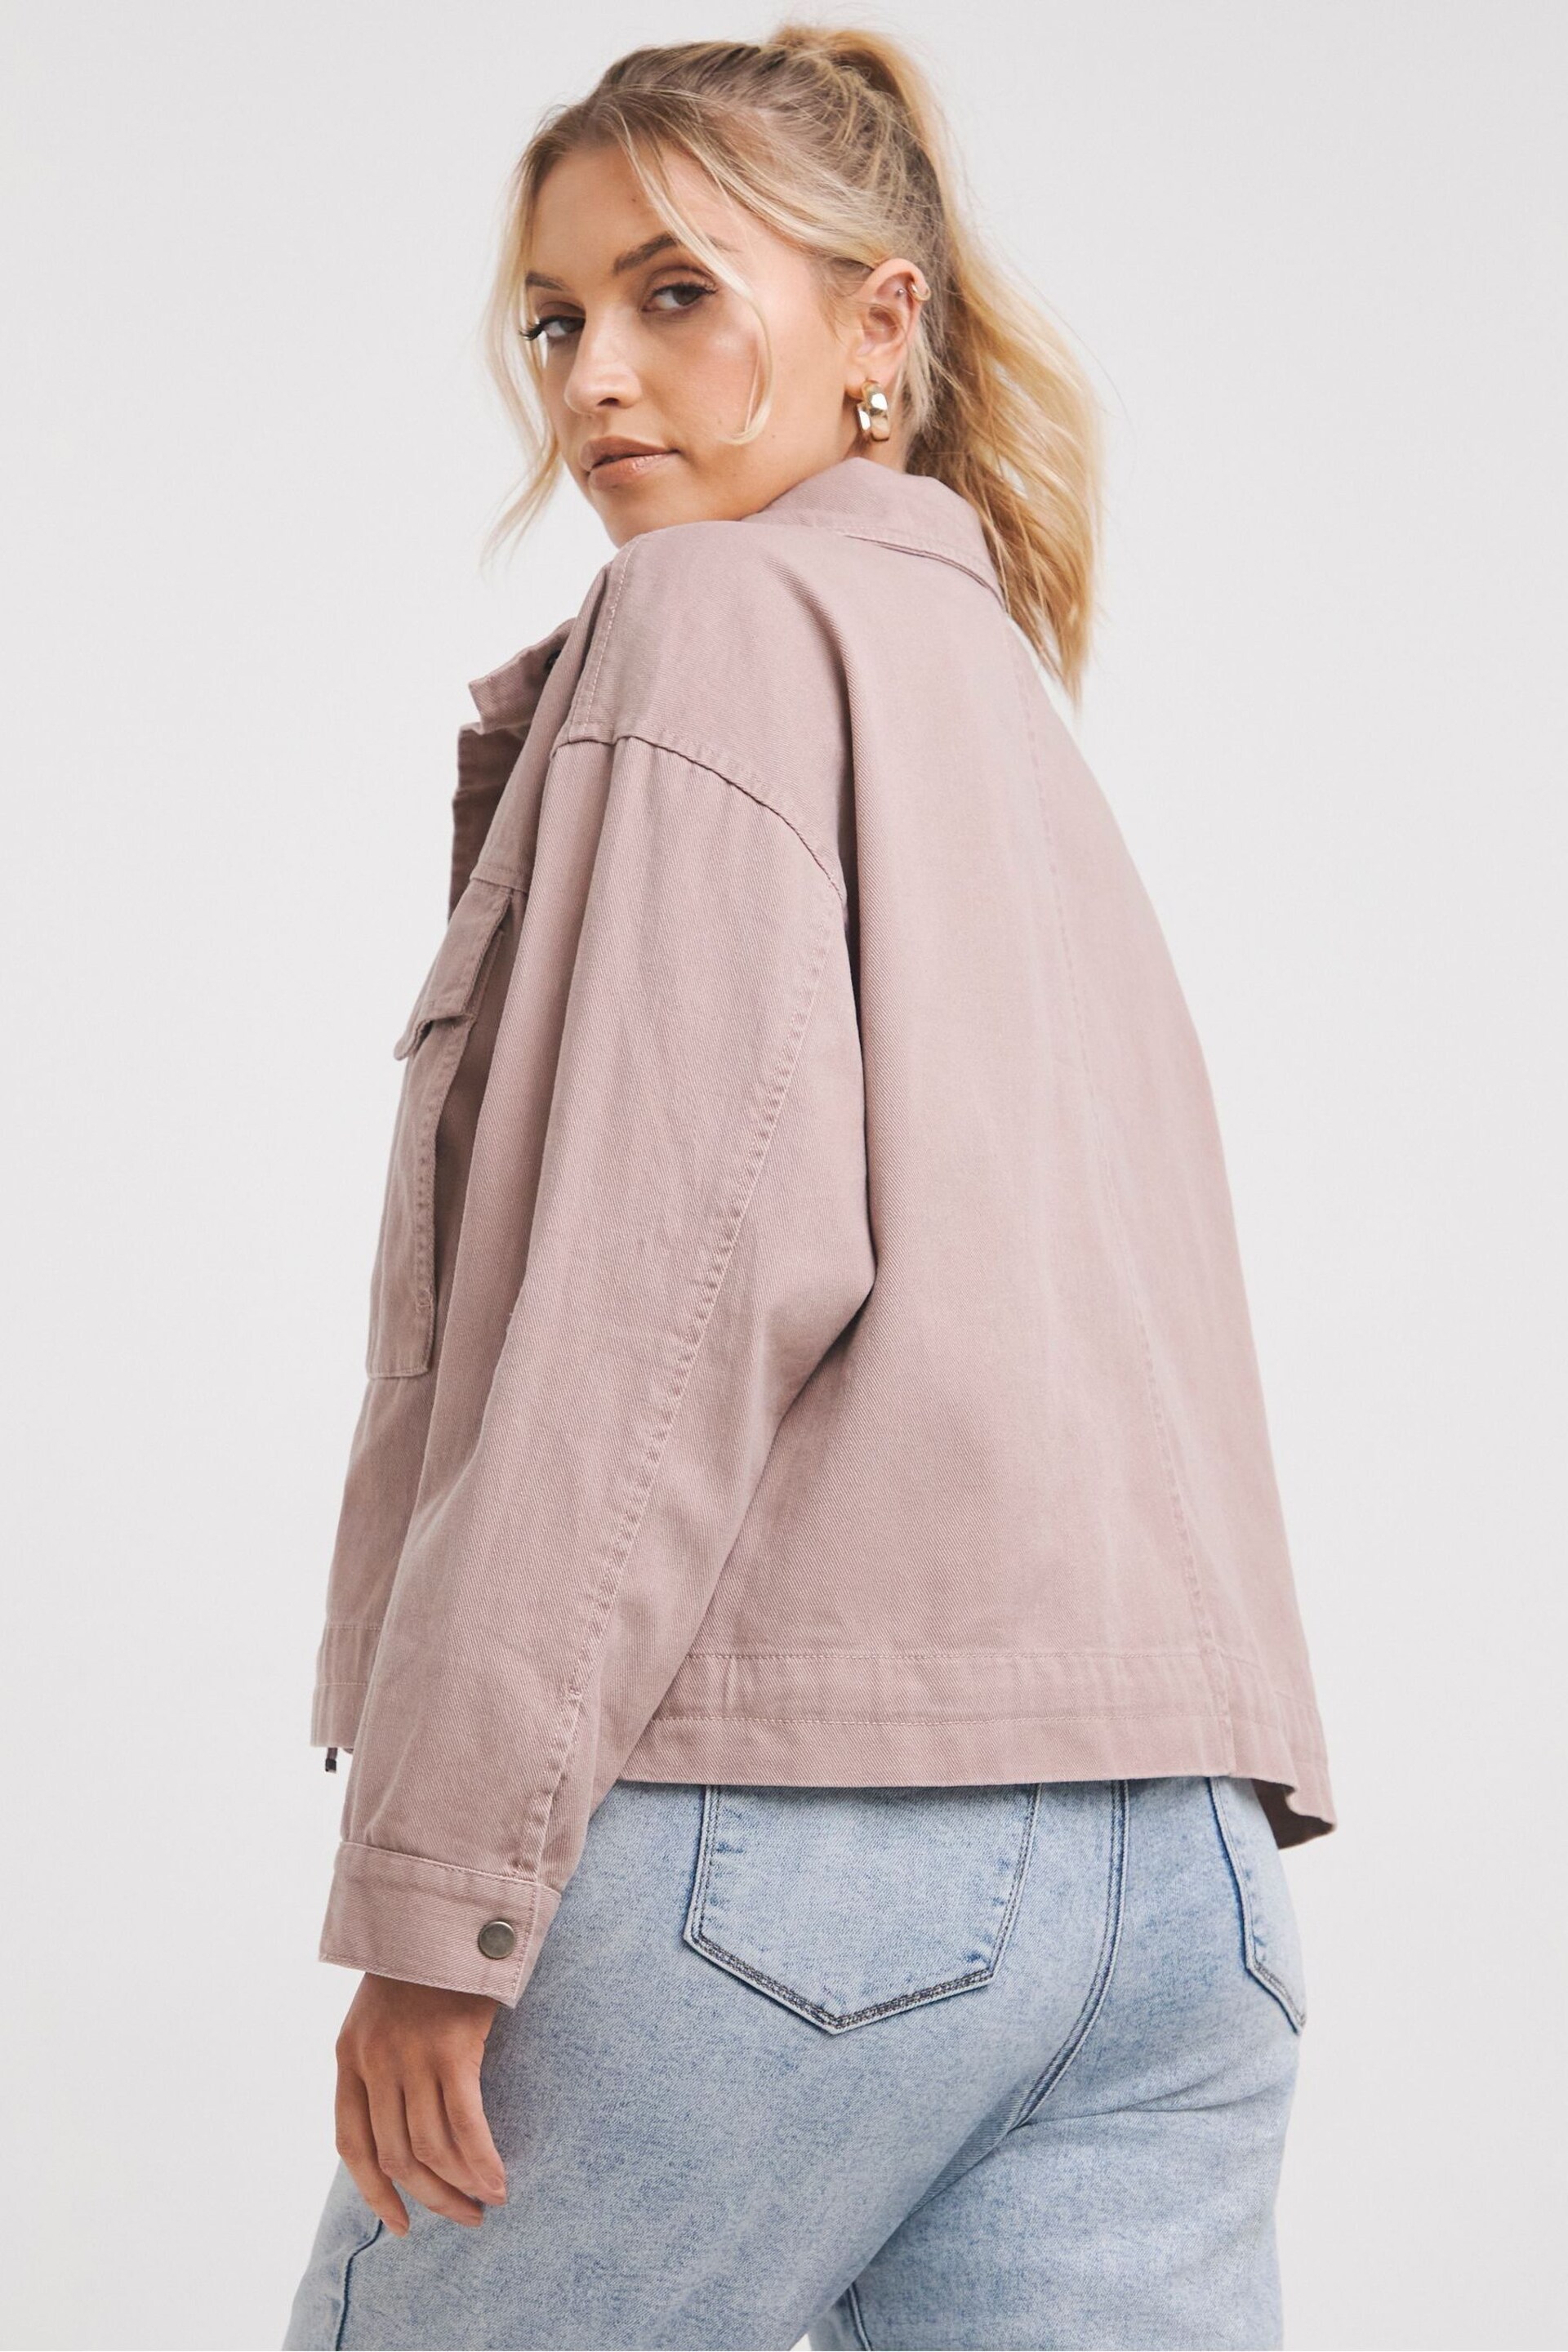 Simply Be Blush Pink Relaxed Utility Jacket - Image 2 of 4